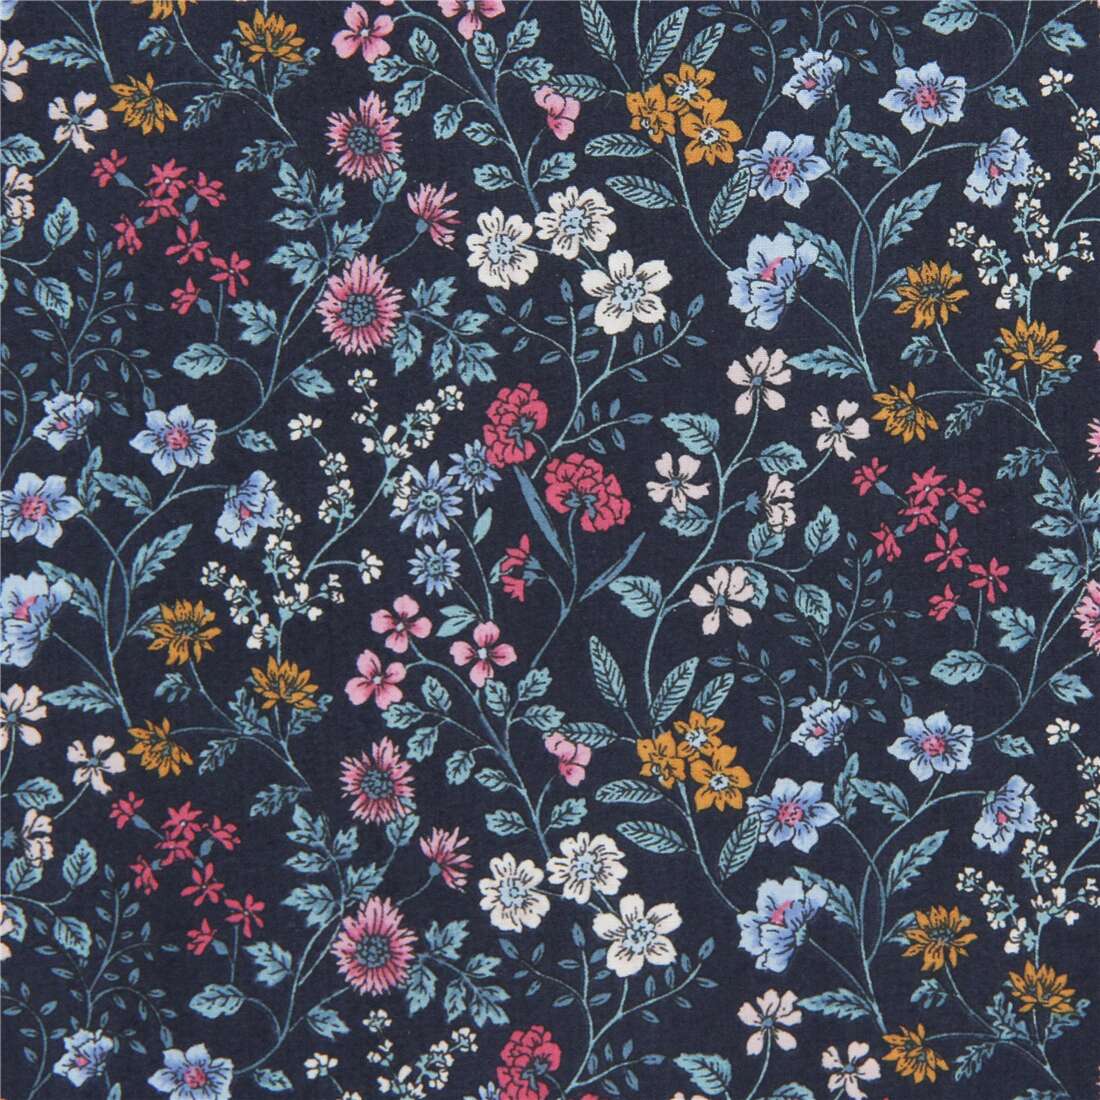 Nature Corner Pink Flower on Not So Solid Blue Cotton Fabric YARD 